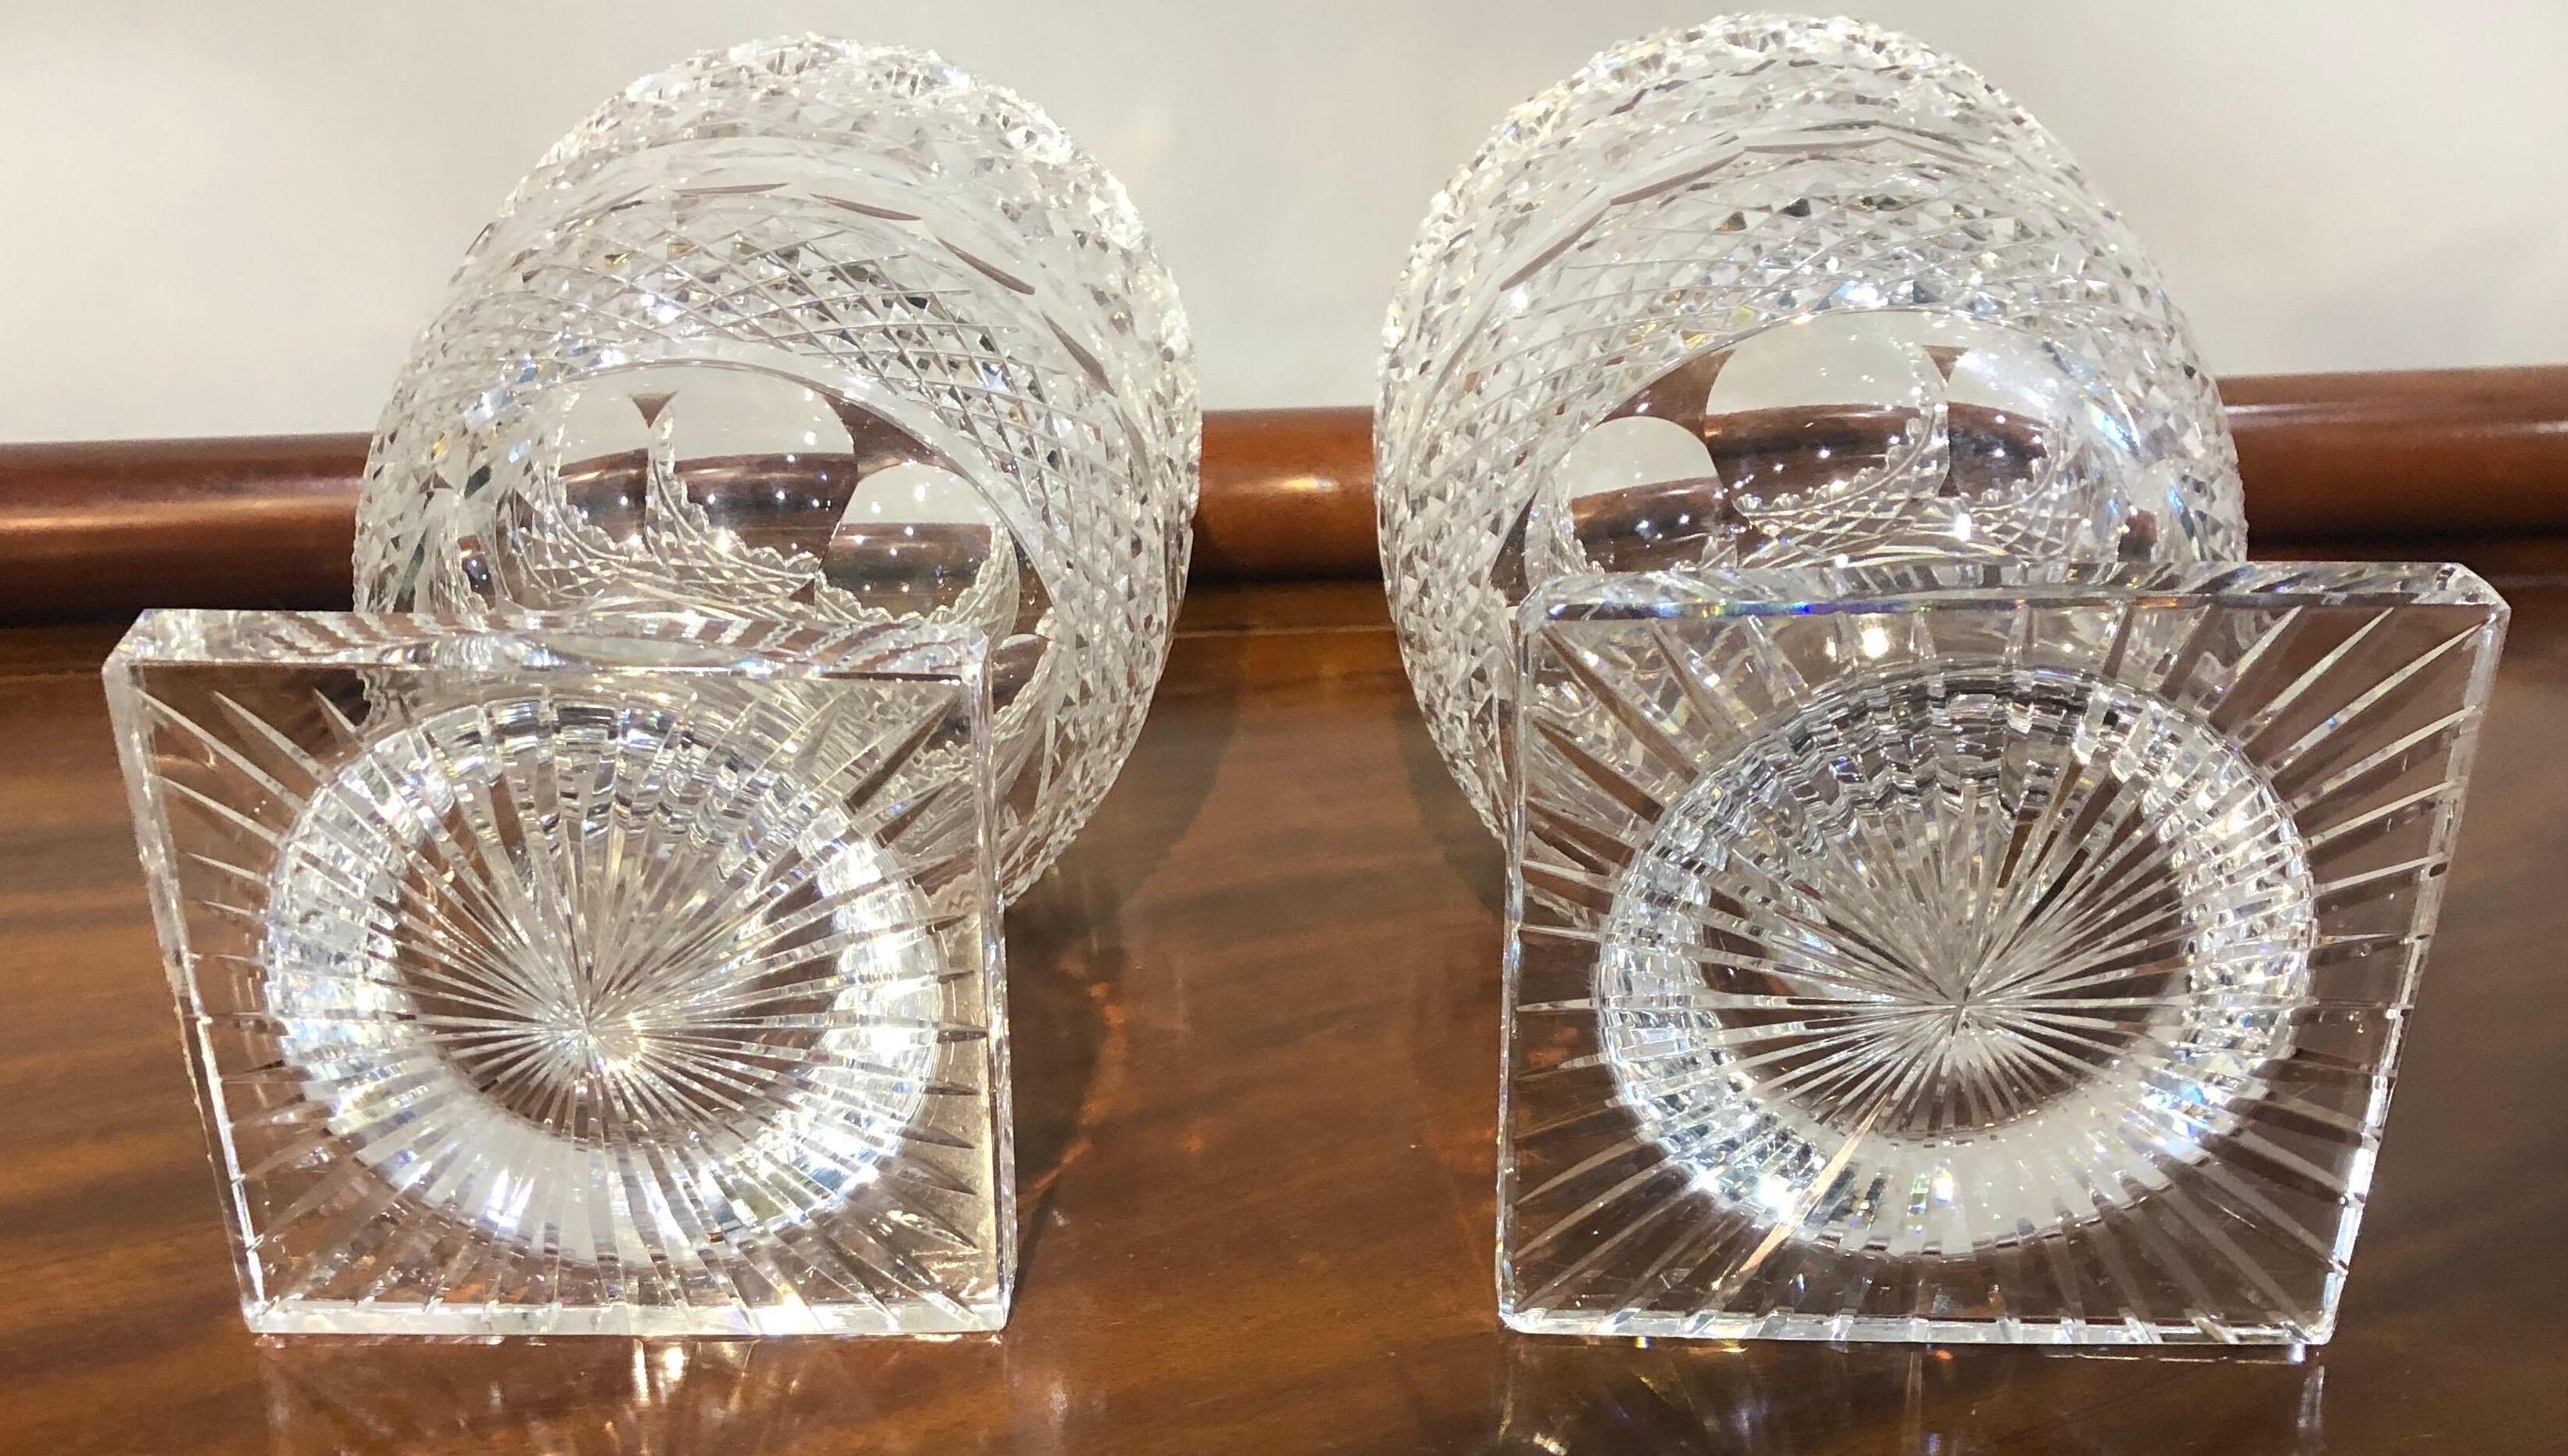 Pair of Late 19th-Early 20th Century Cut Glass Vases 2